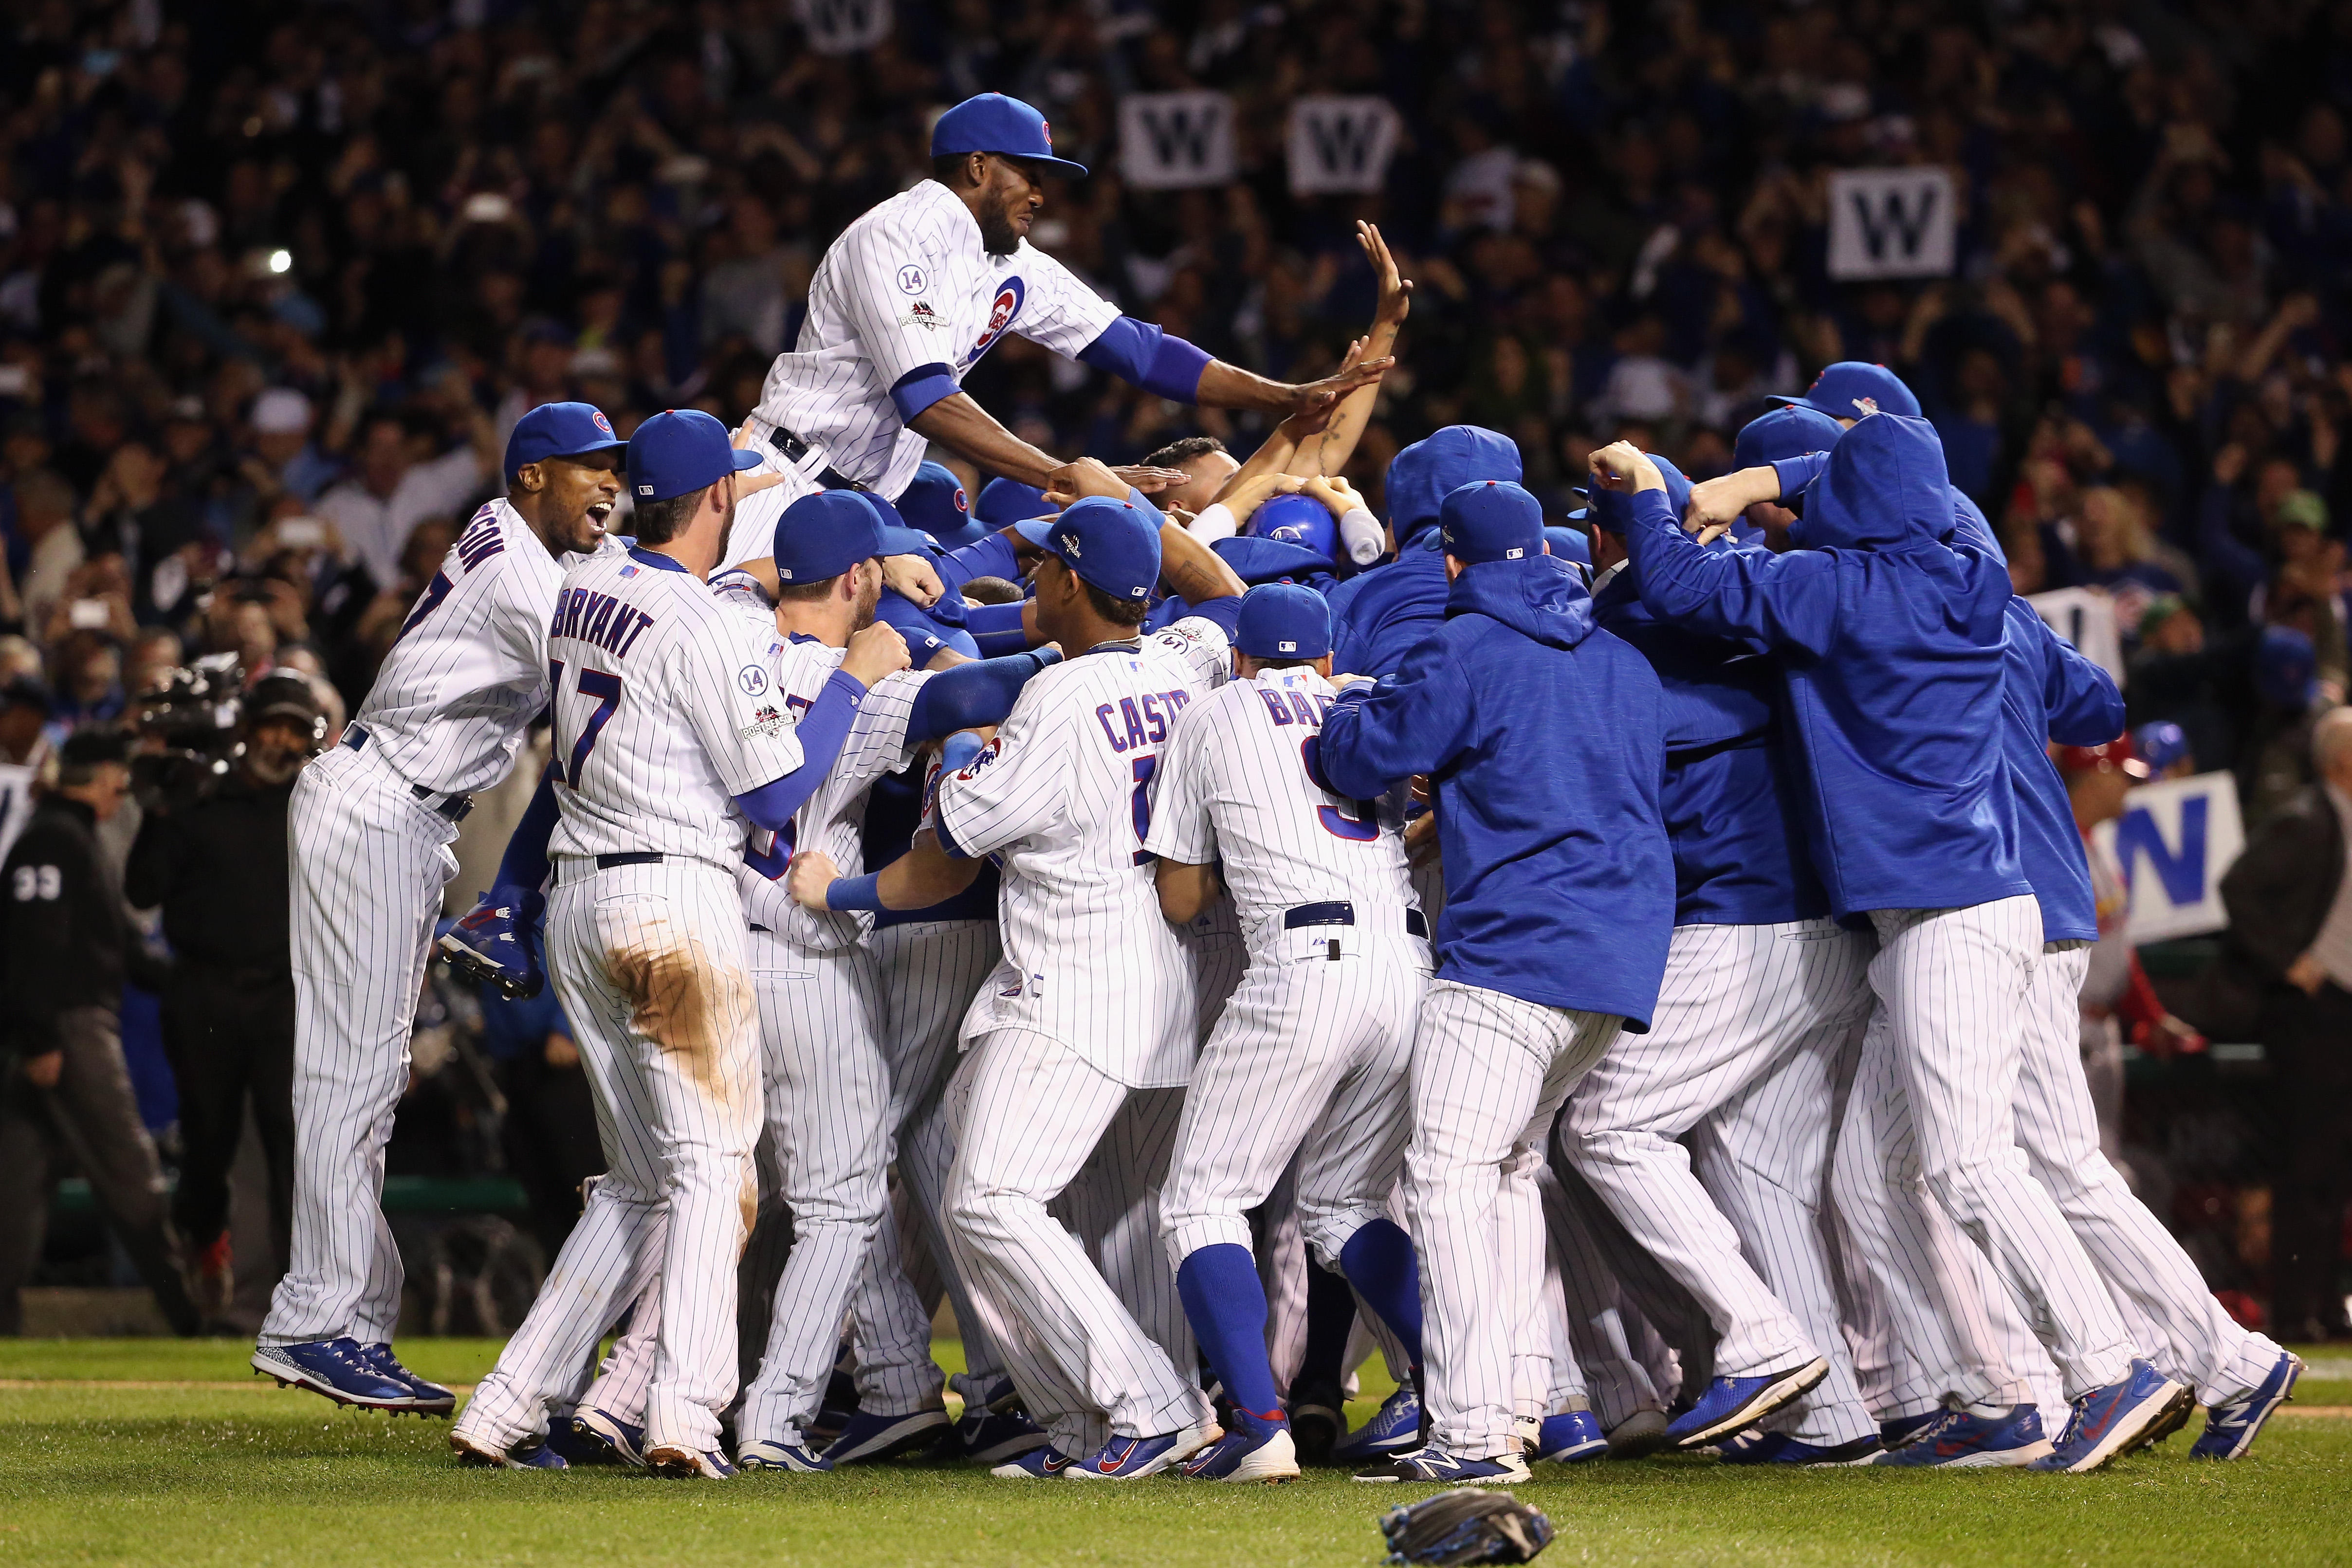 Believe it! Chicago Cubs end the curse, win 2016 World Series